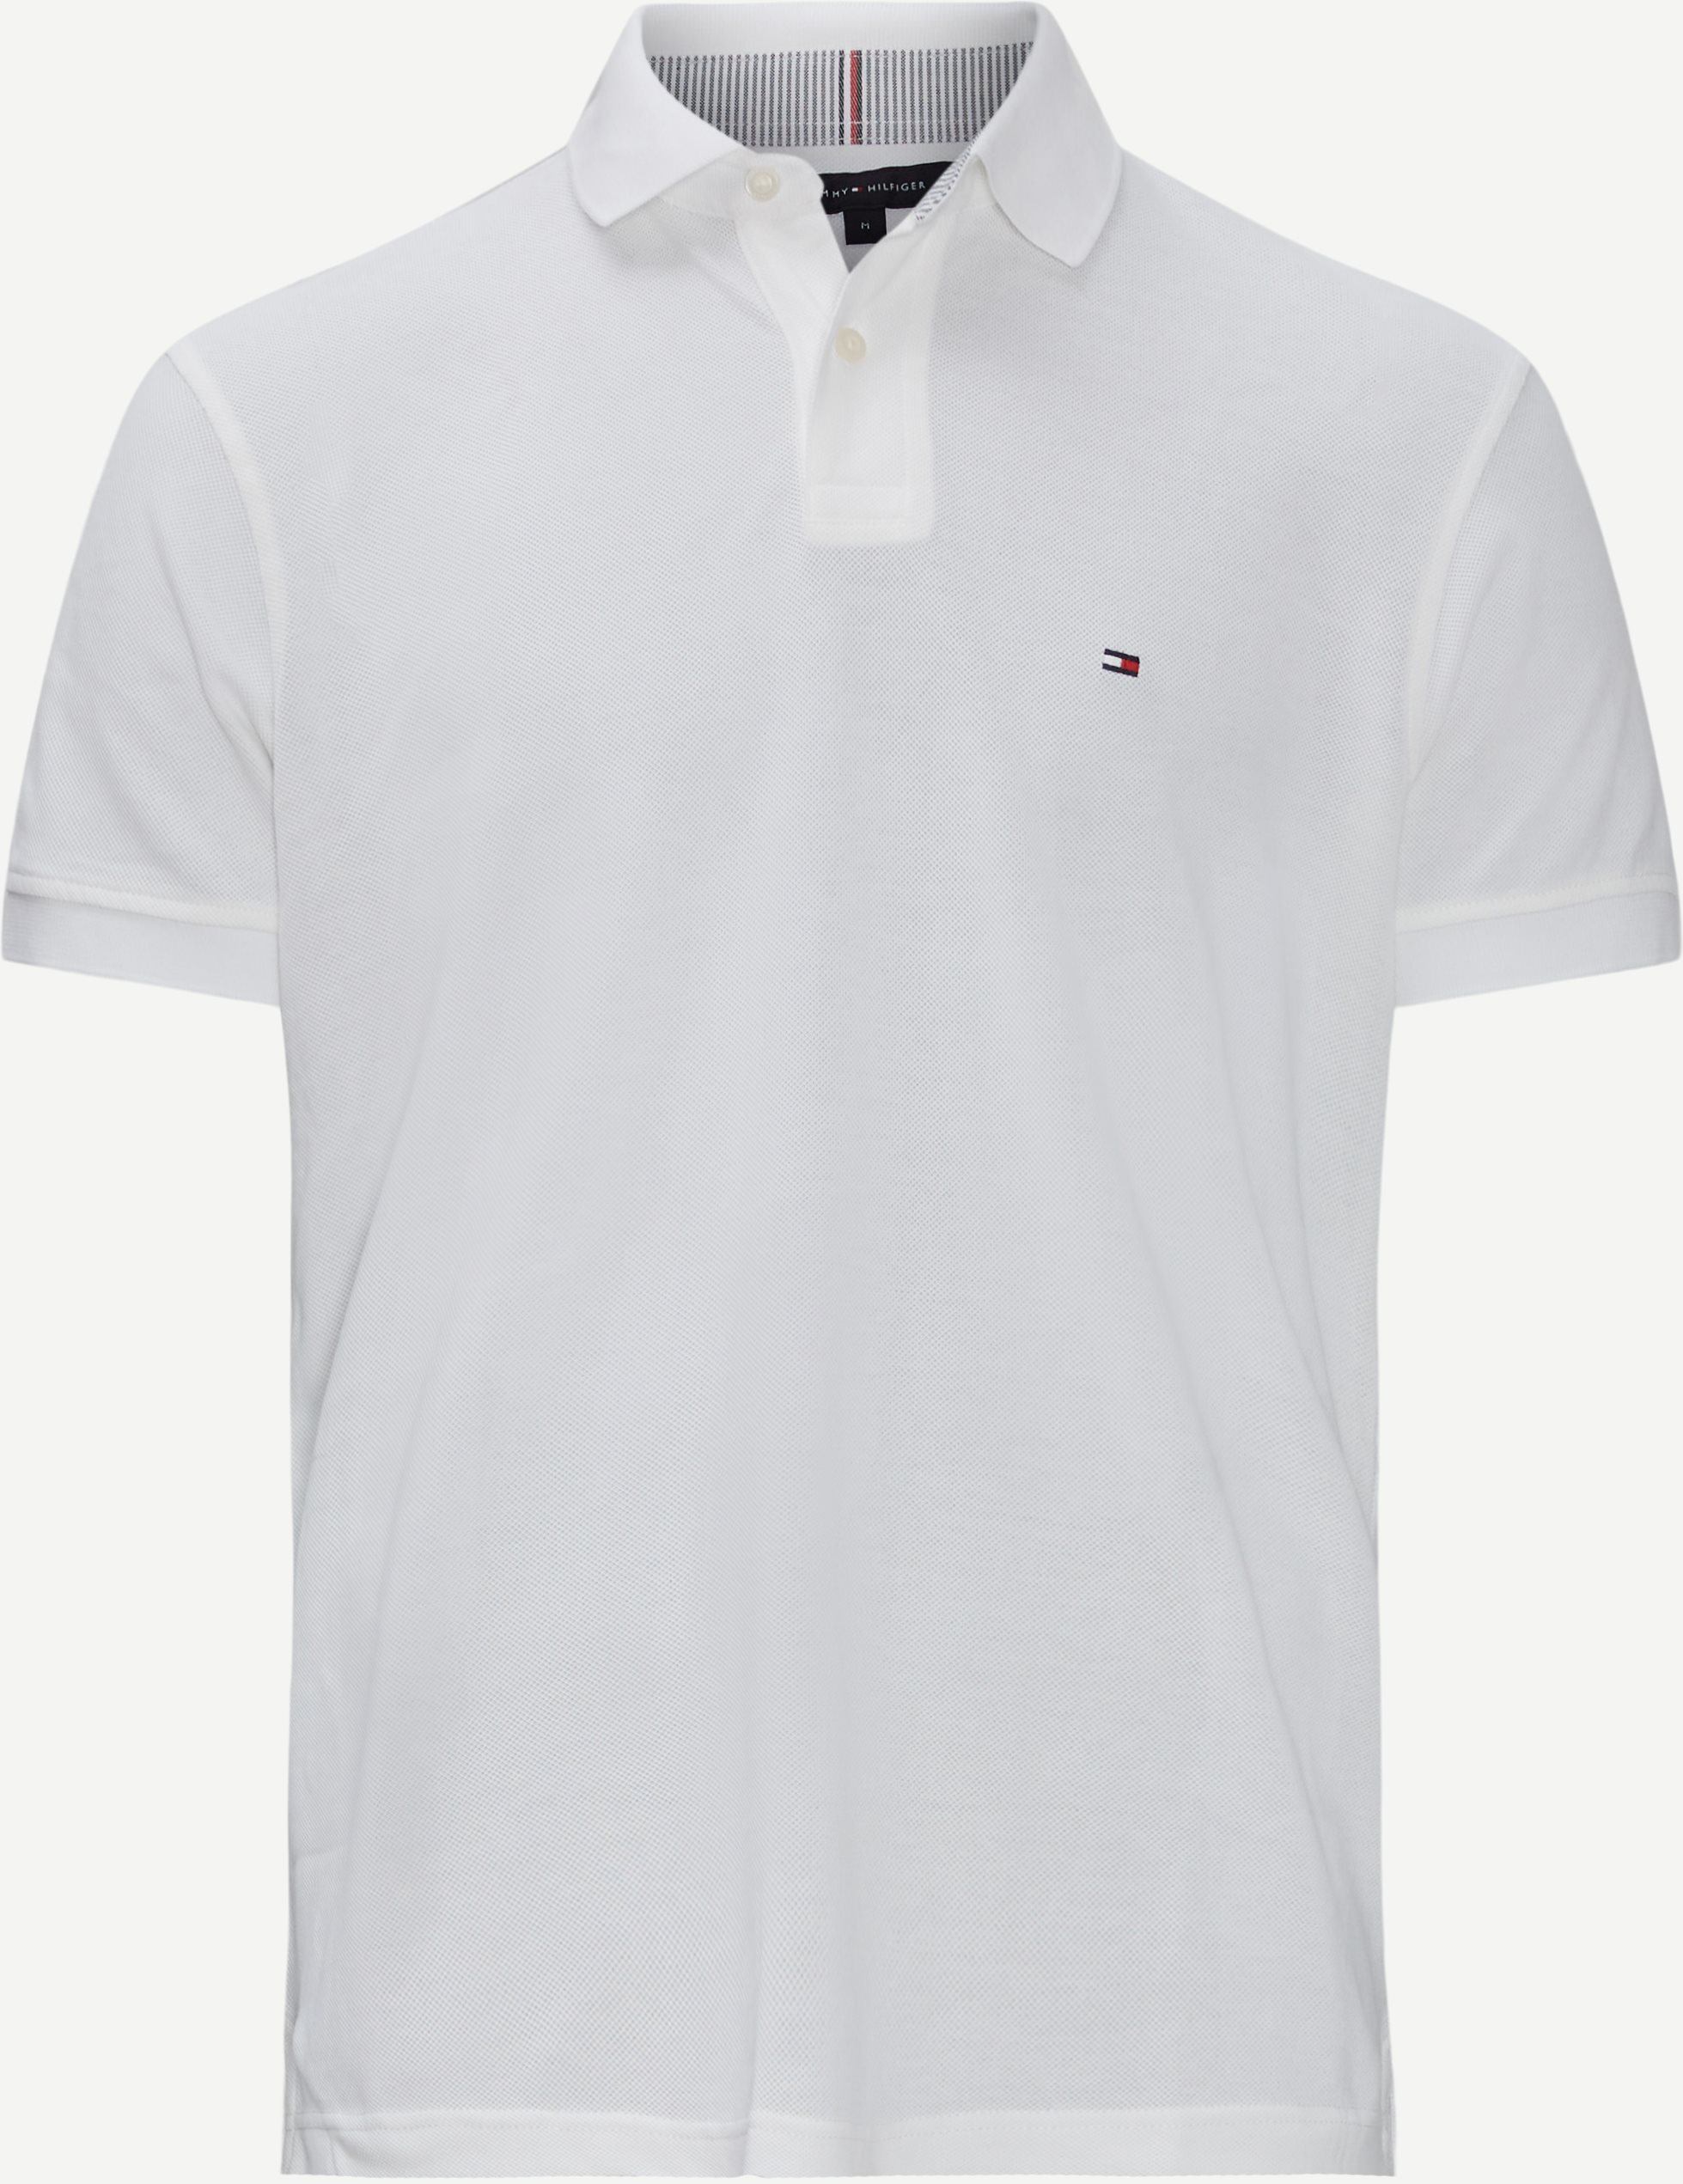 Tommy Hilfiger T-shirts 17770 1985 REGULAR POLO SS23 White